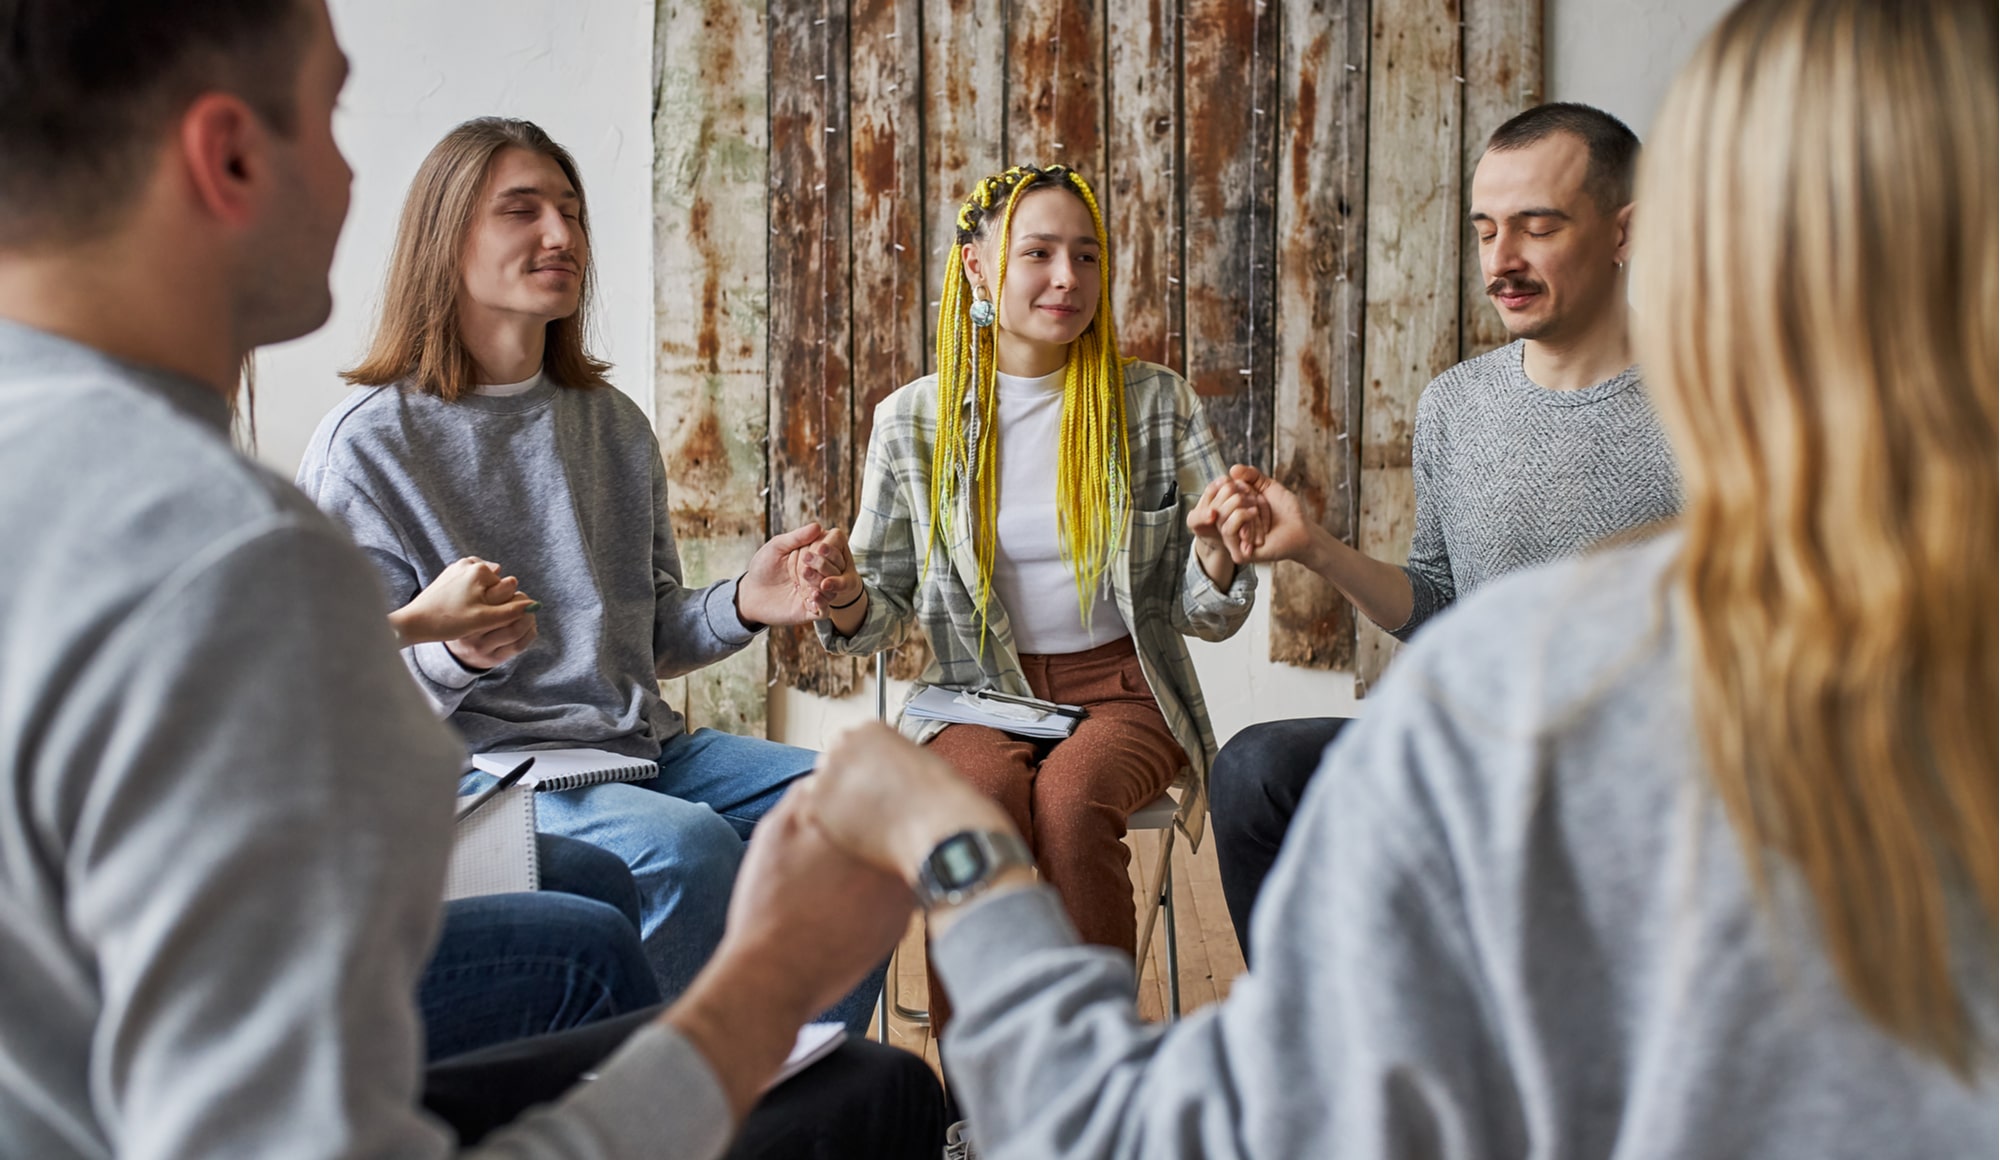 How to Tell Your Family You Need Help with Alcohol Pathfinders - A man who has been struggling with alcohol is sitting with his family and asking for help with alcohol, potentially involving going to an alcohol rehab. His family is surrounding him with love and support.